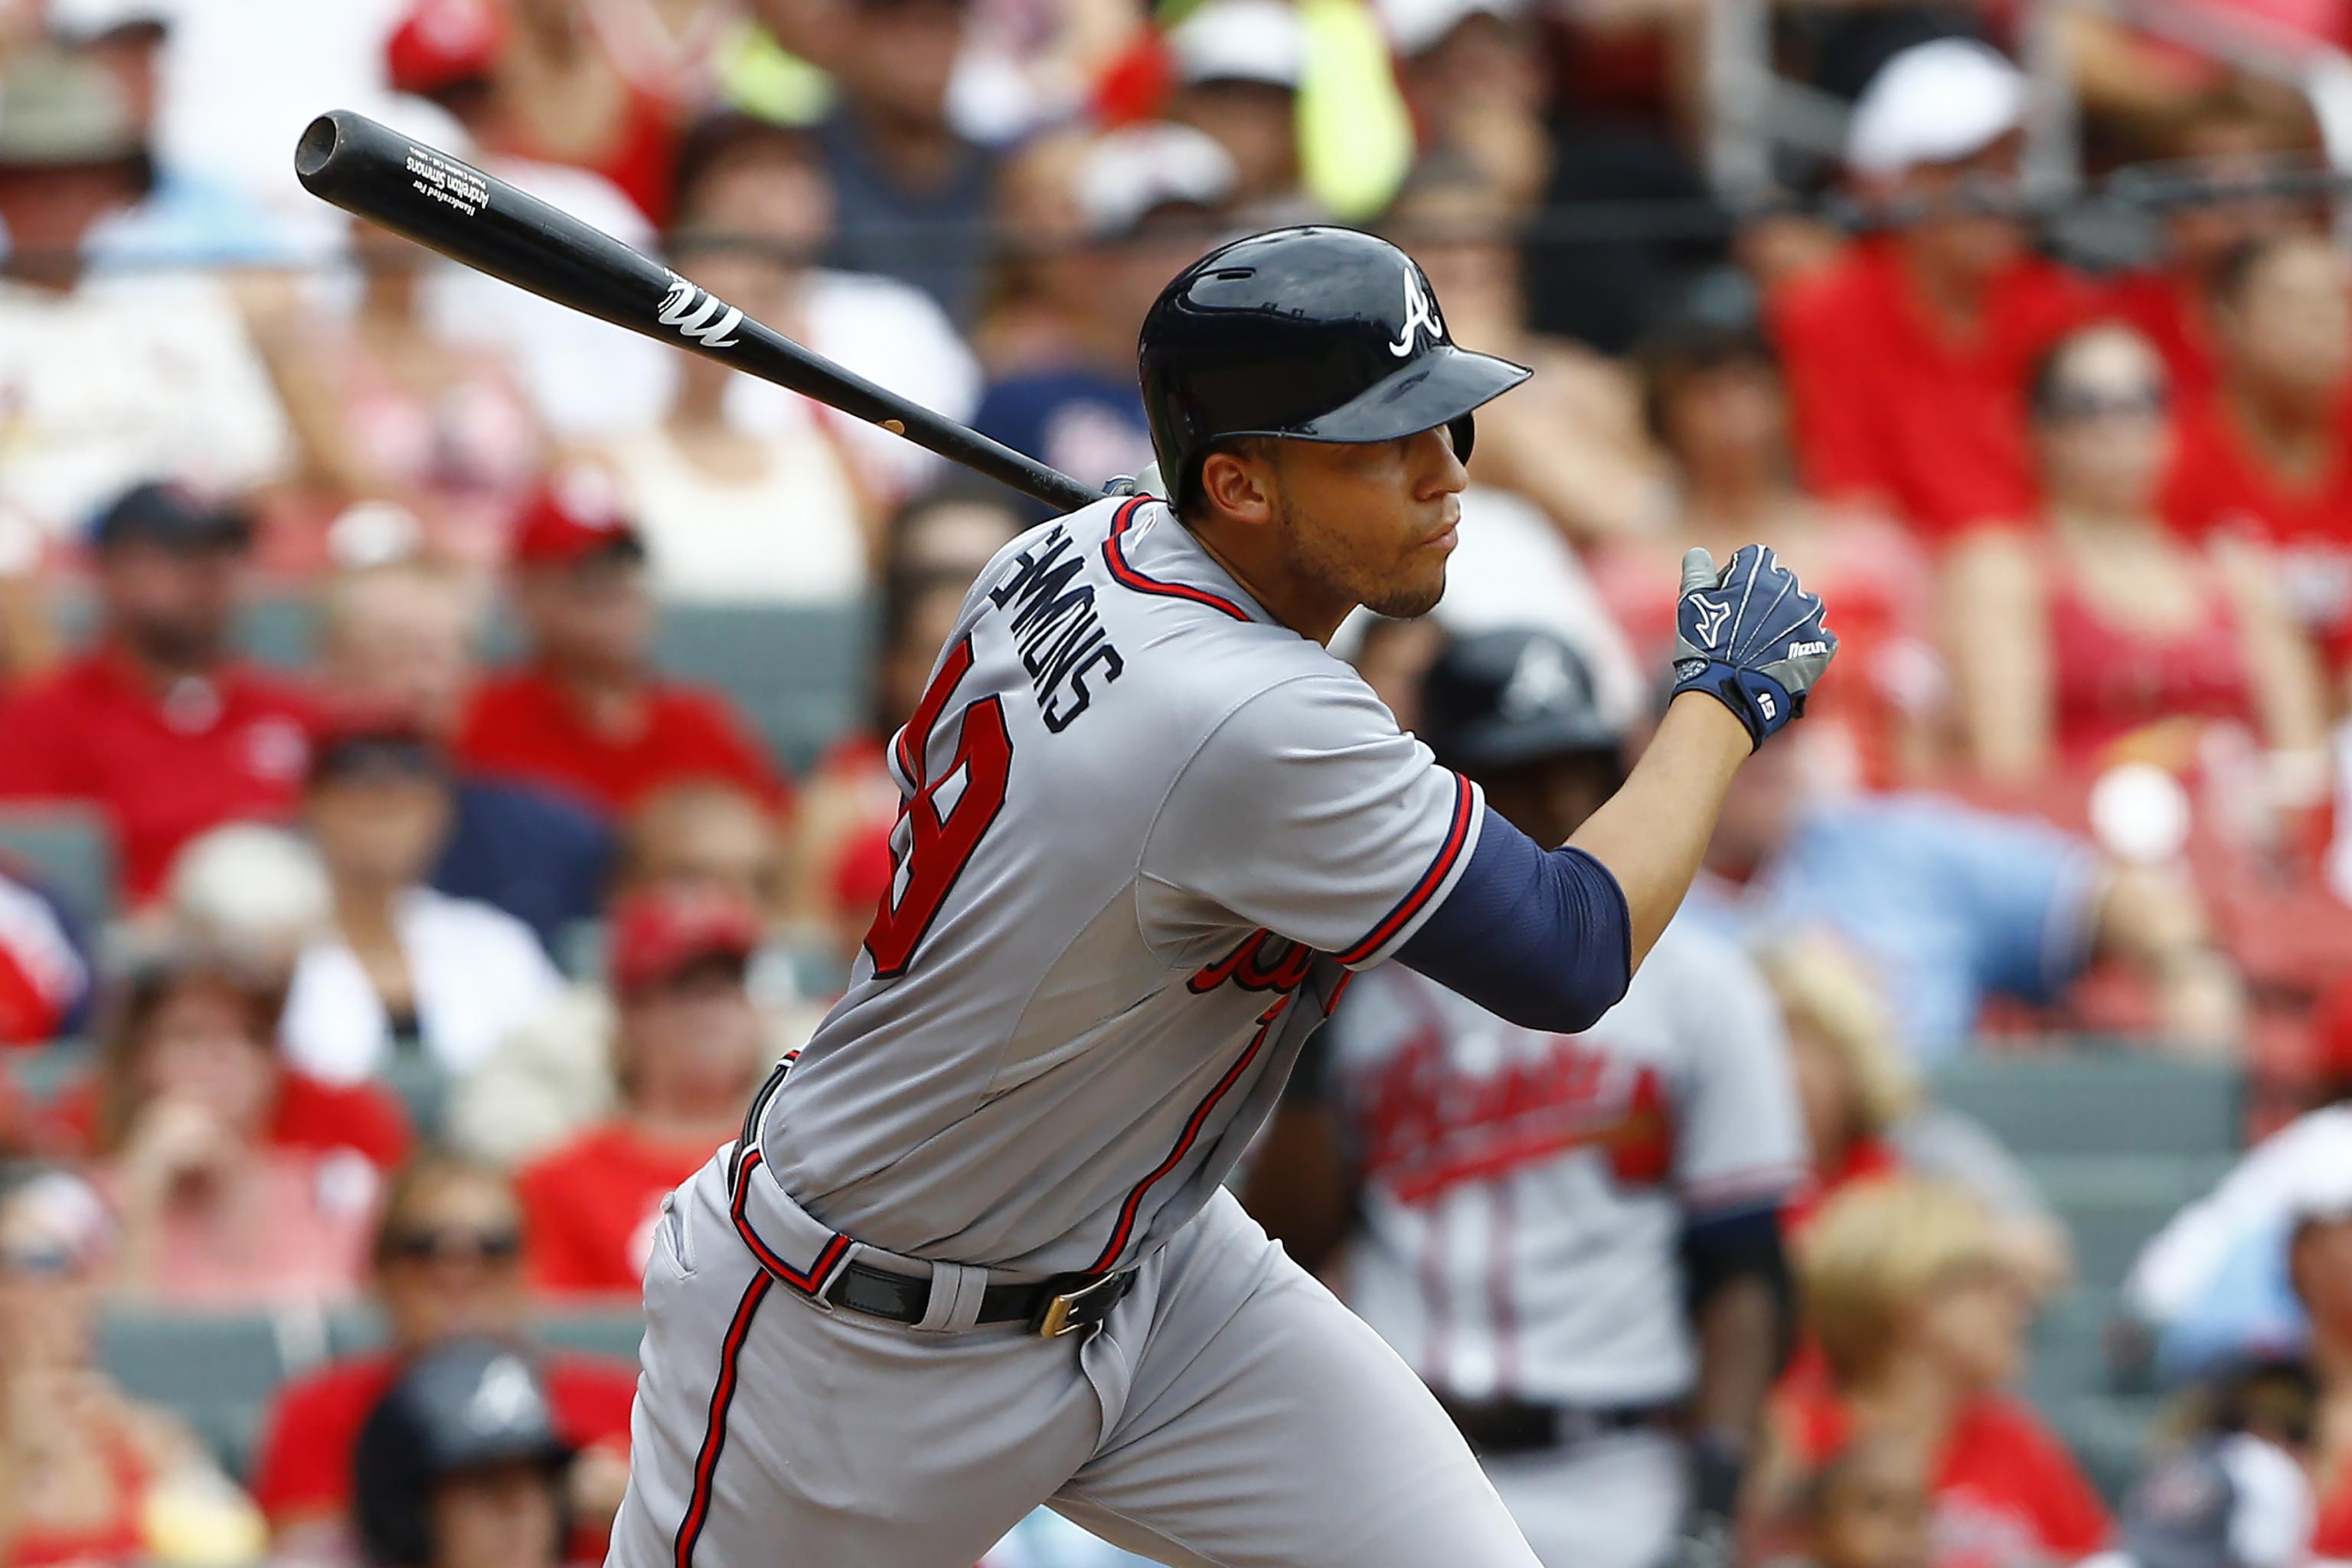 Braves trade shortstop Andrelton Simmons to Angels